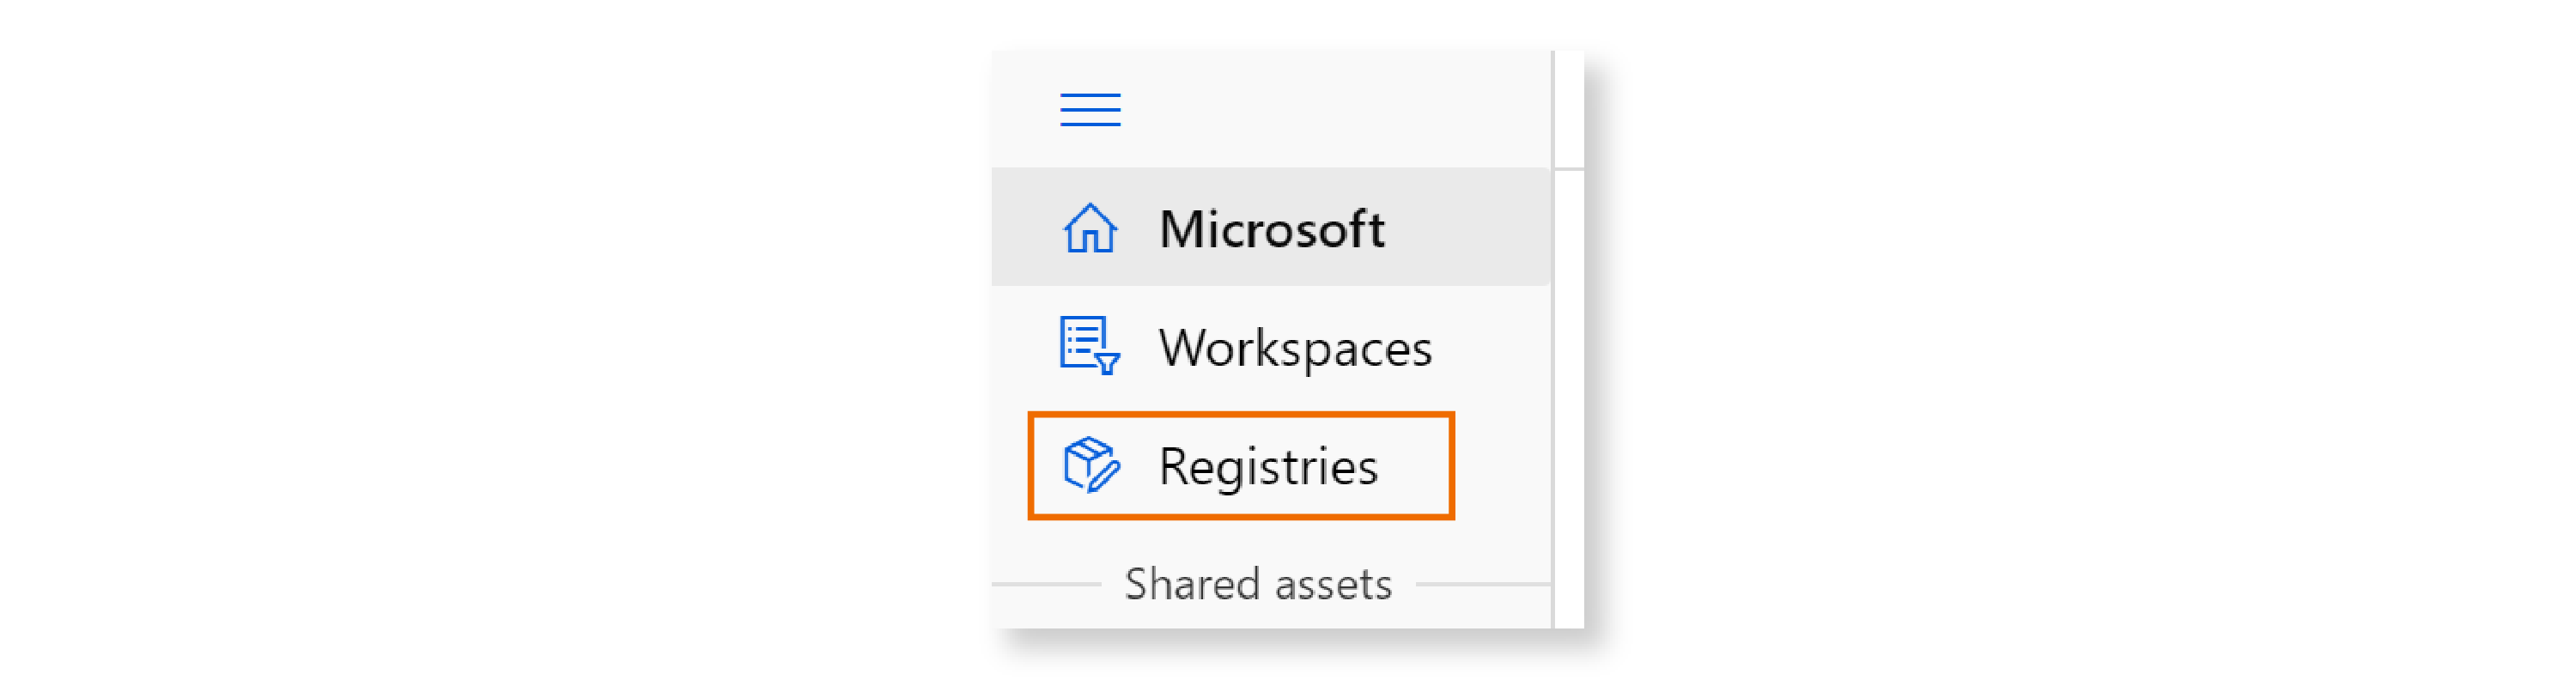 Screenshot showing the "Registries" section in the left navigation of the Azure ML Studio.